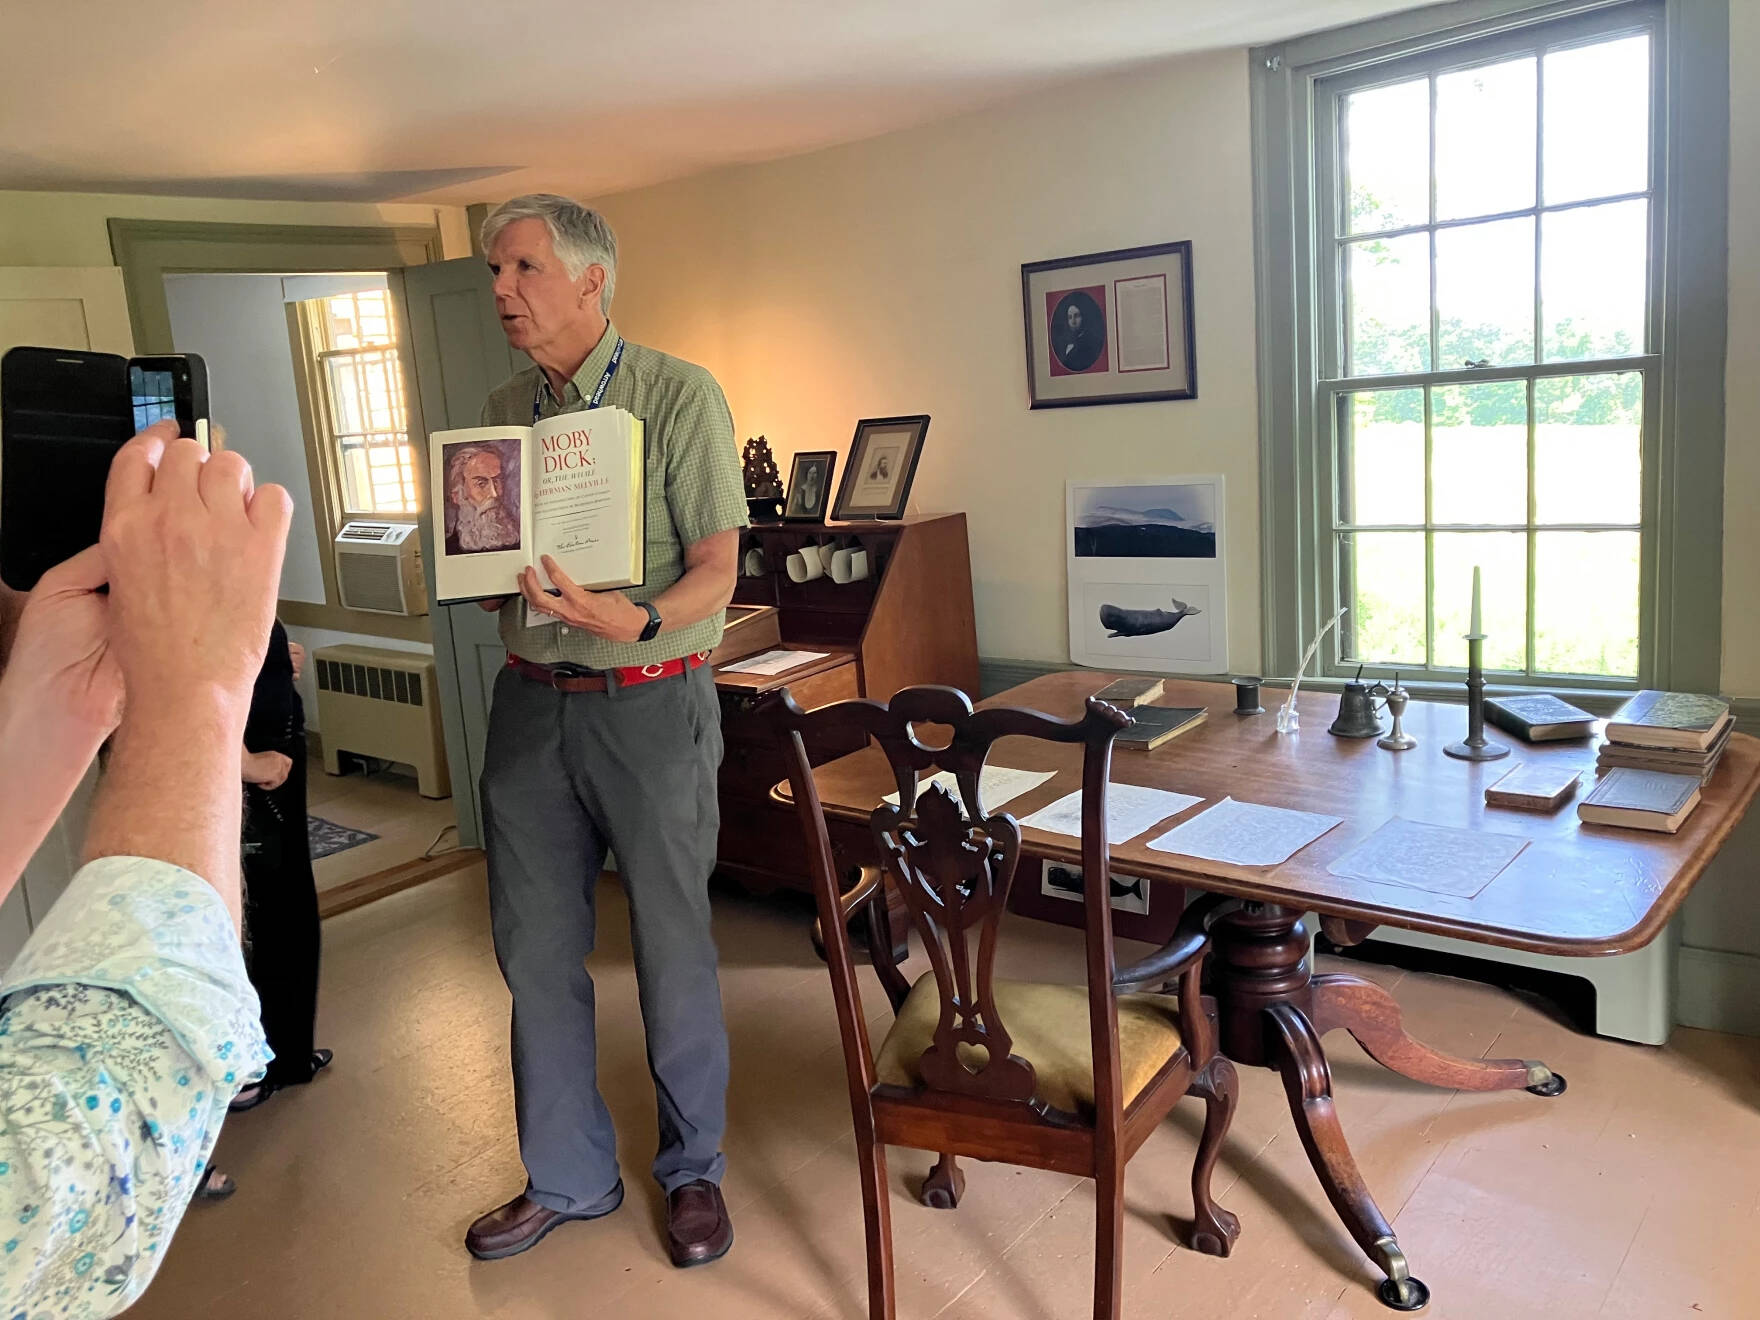 Historian John Dickson gives a tour inside Arrowhead, the home where author Herman Melville lived and wrote "Moby-Dick (Nancy Eve Cohen/NEPM)